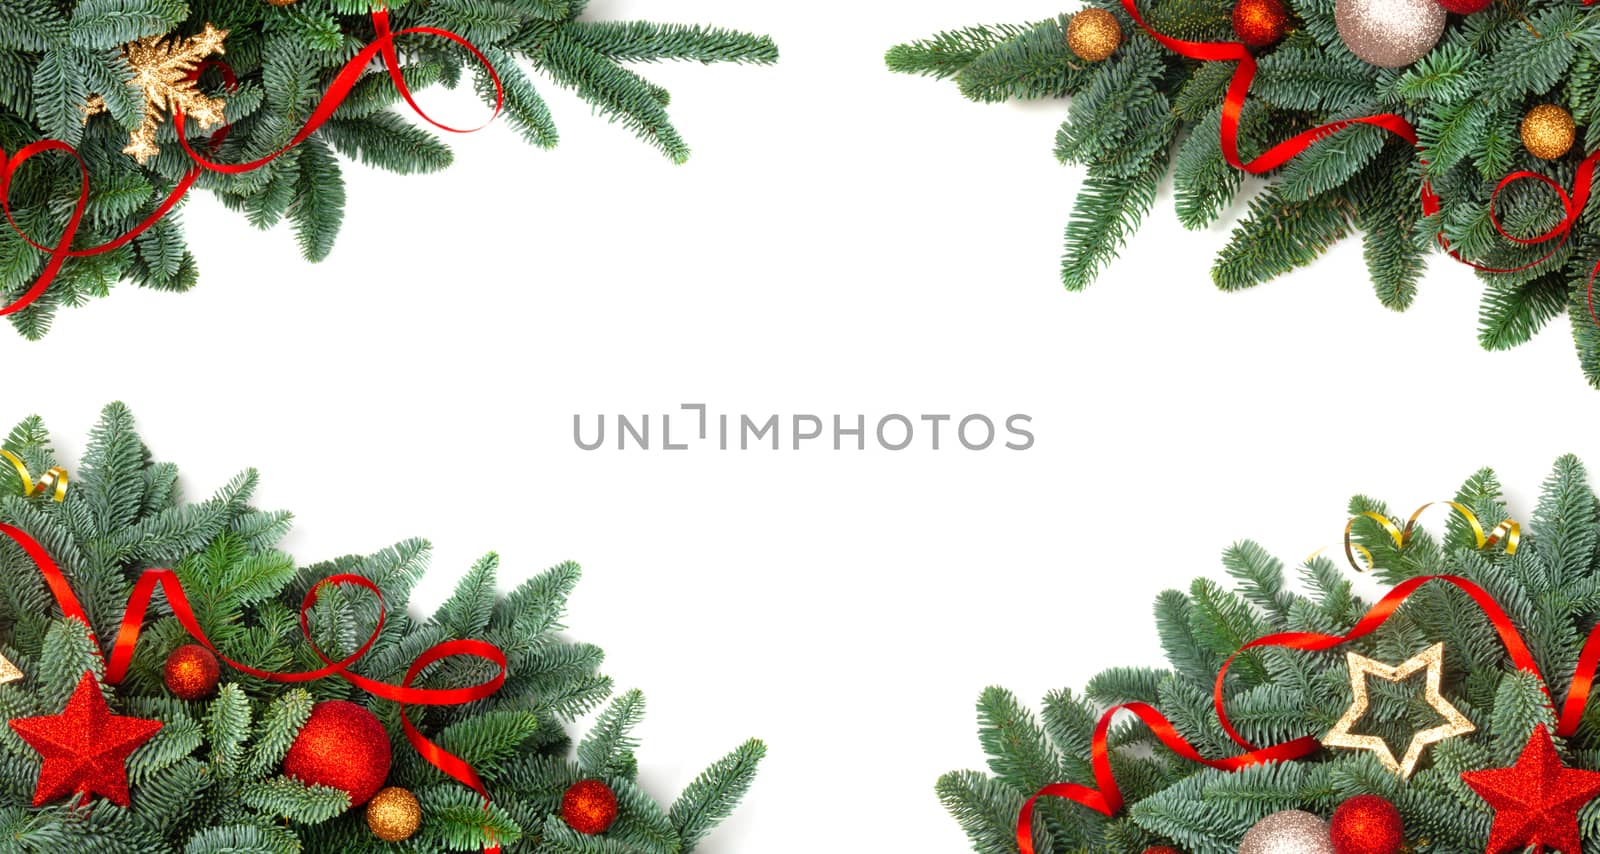 Christmas design element border frame of noble fir tree branches and red and golden baubles isolated on white background